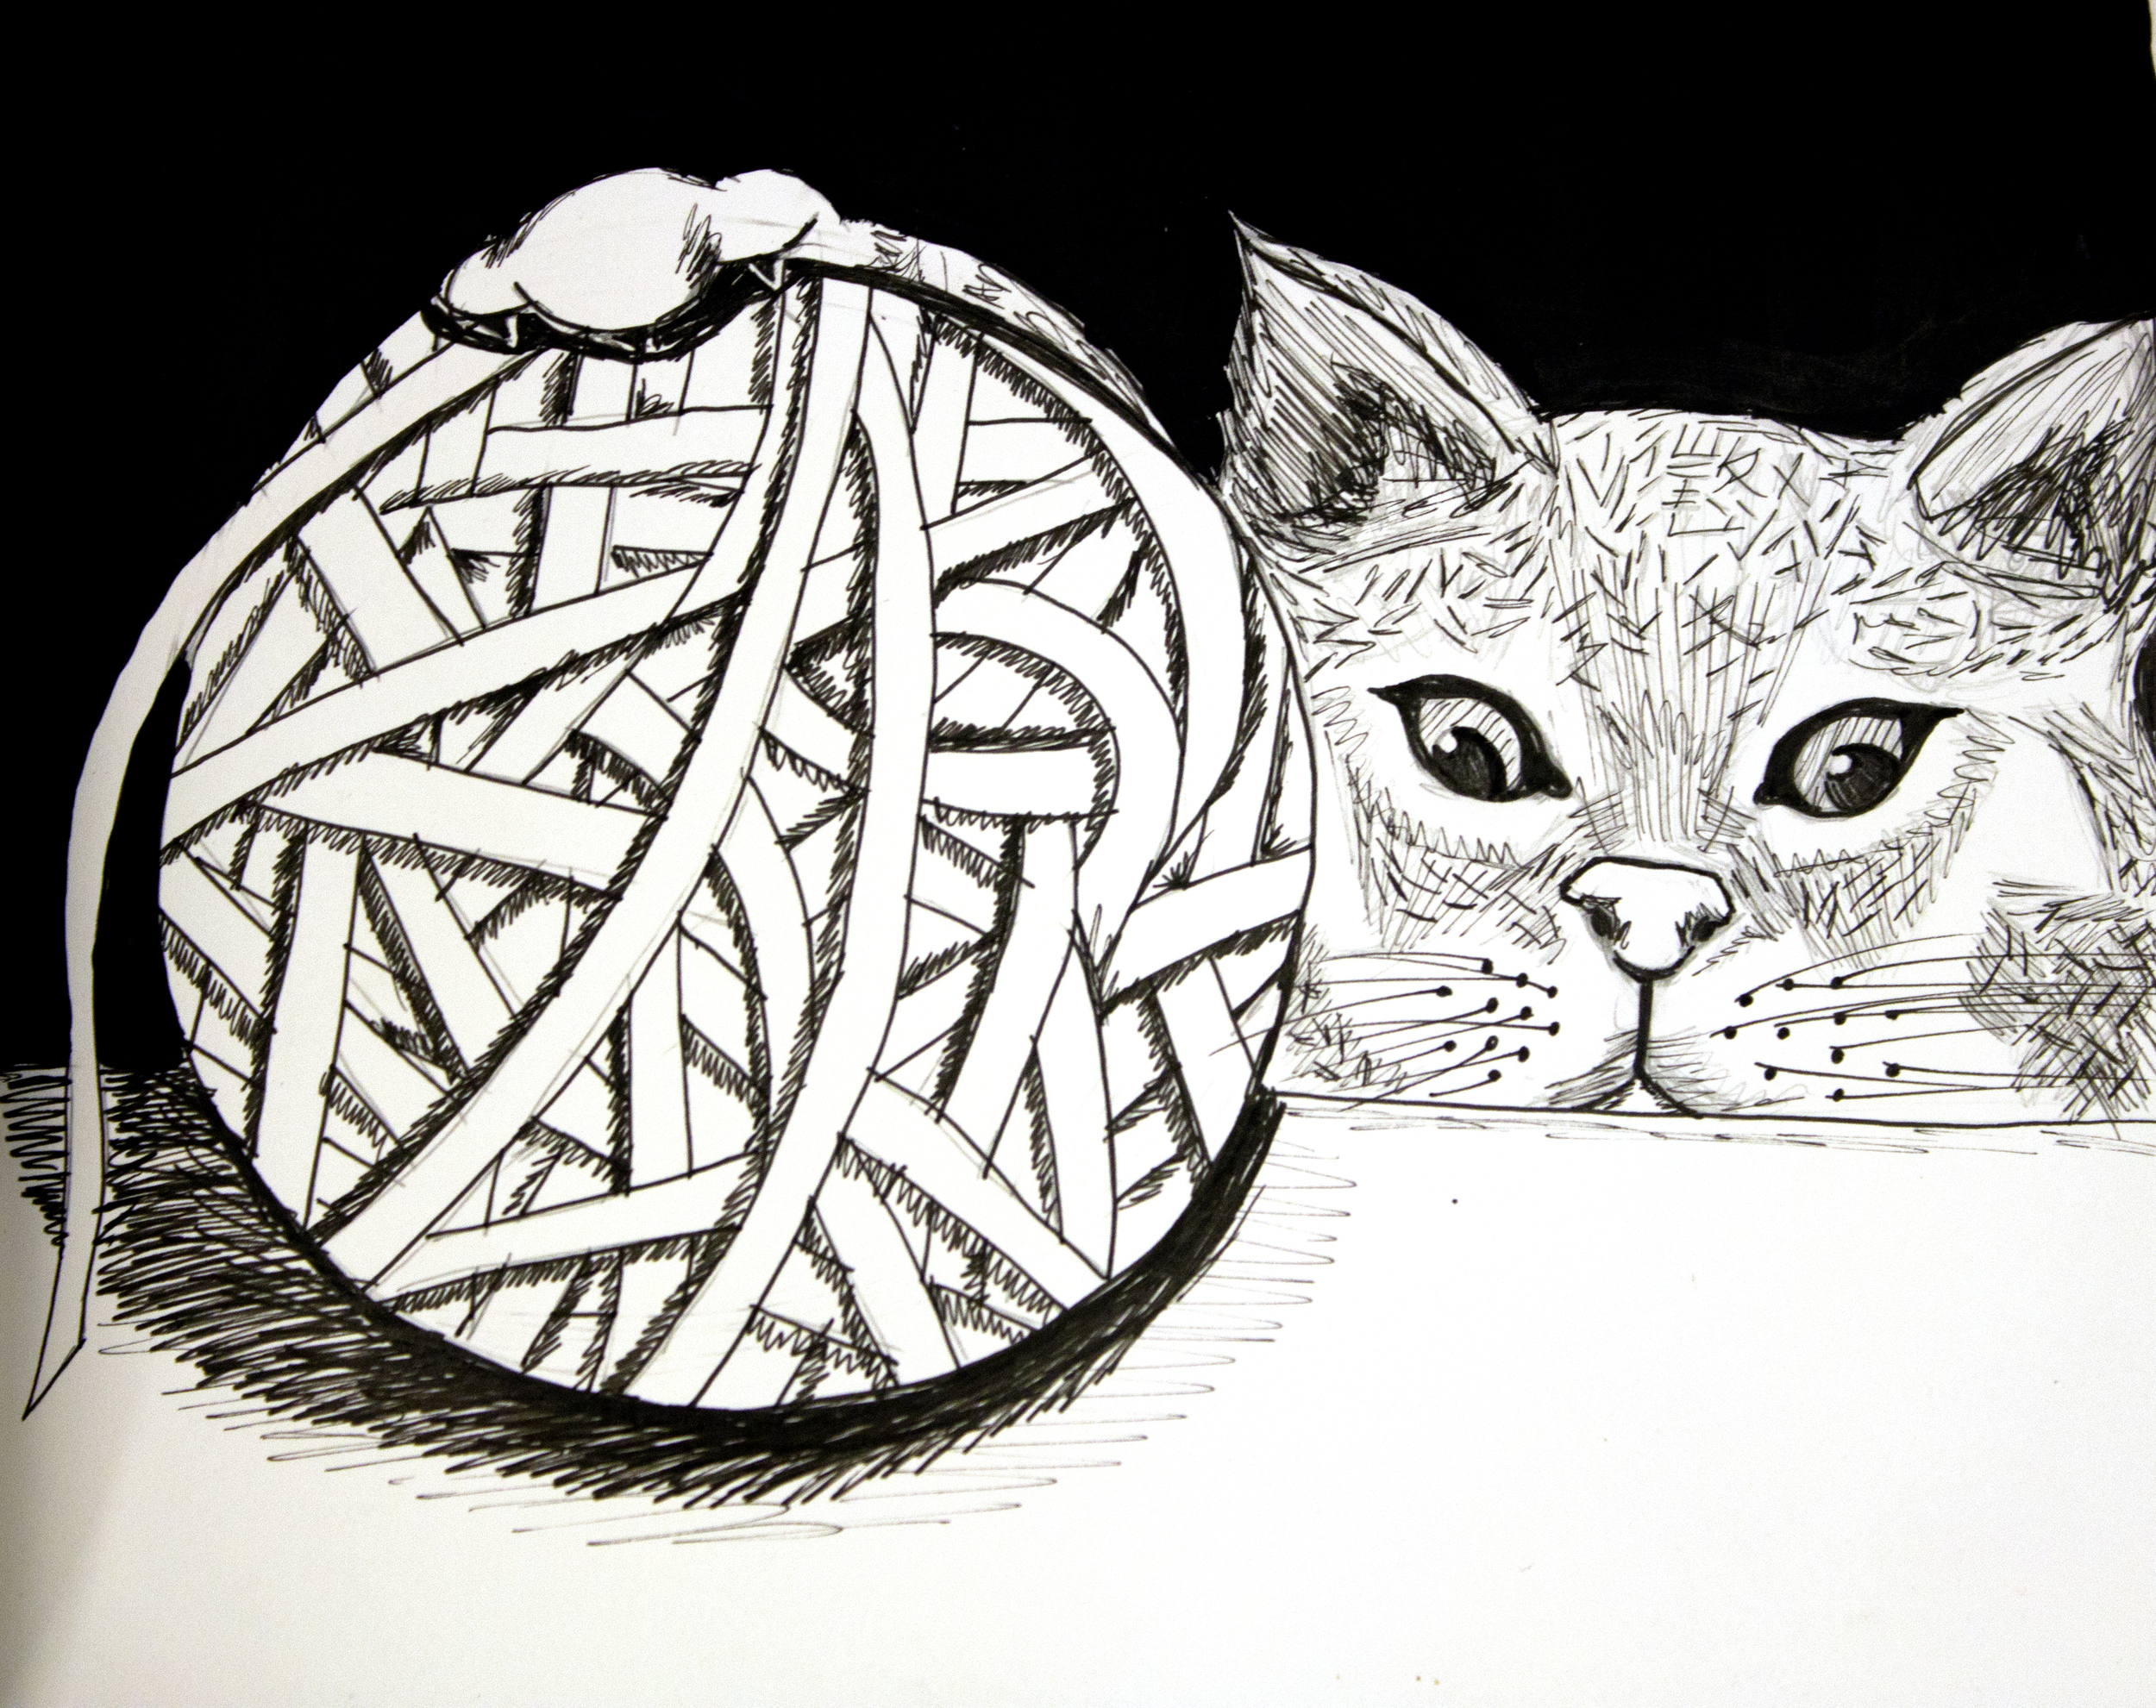  Curious Kitten  2012, ink on paper,&nbsp;6in x 8in 